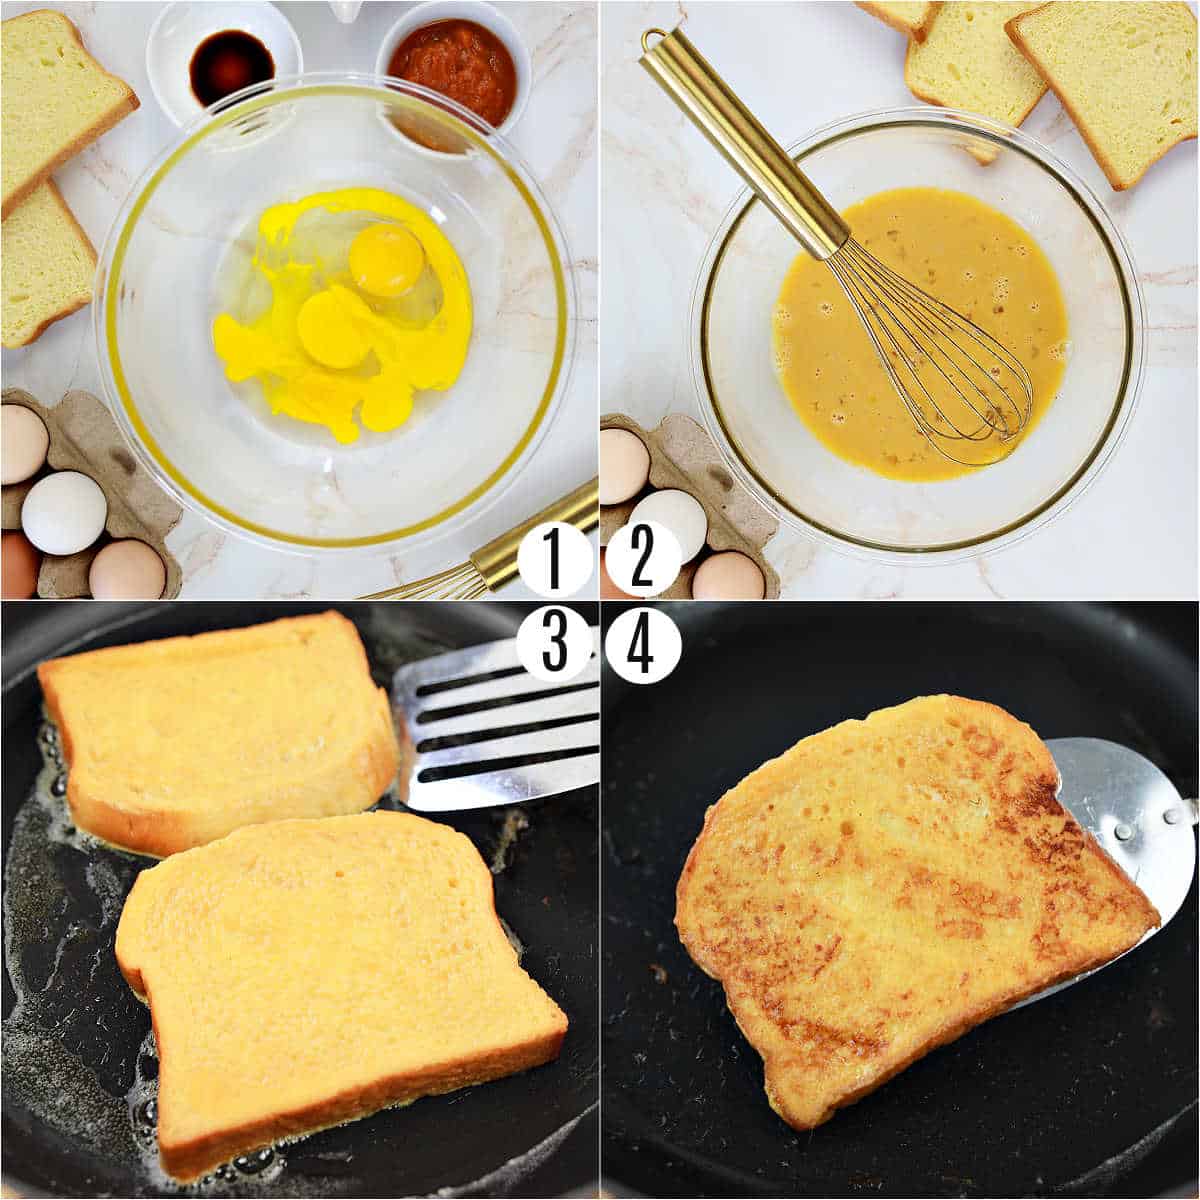 Step by step photos showing how to make pumpkin french toast.